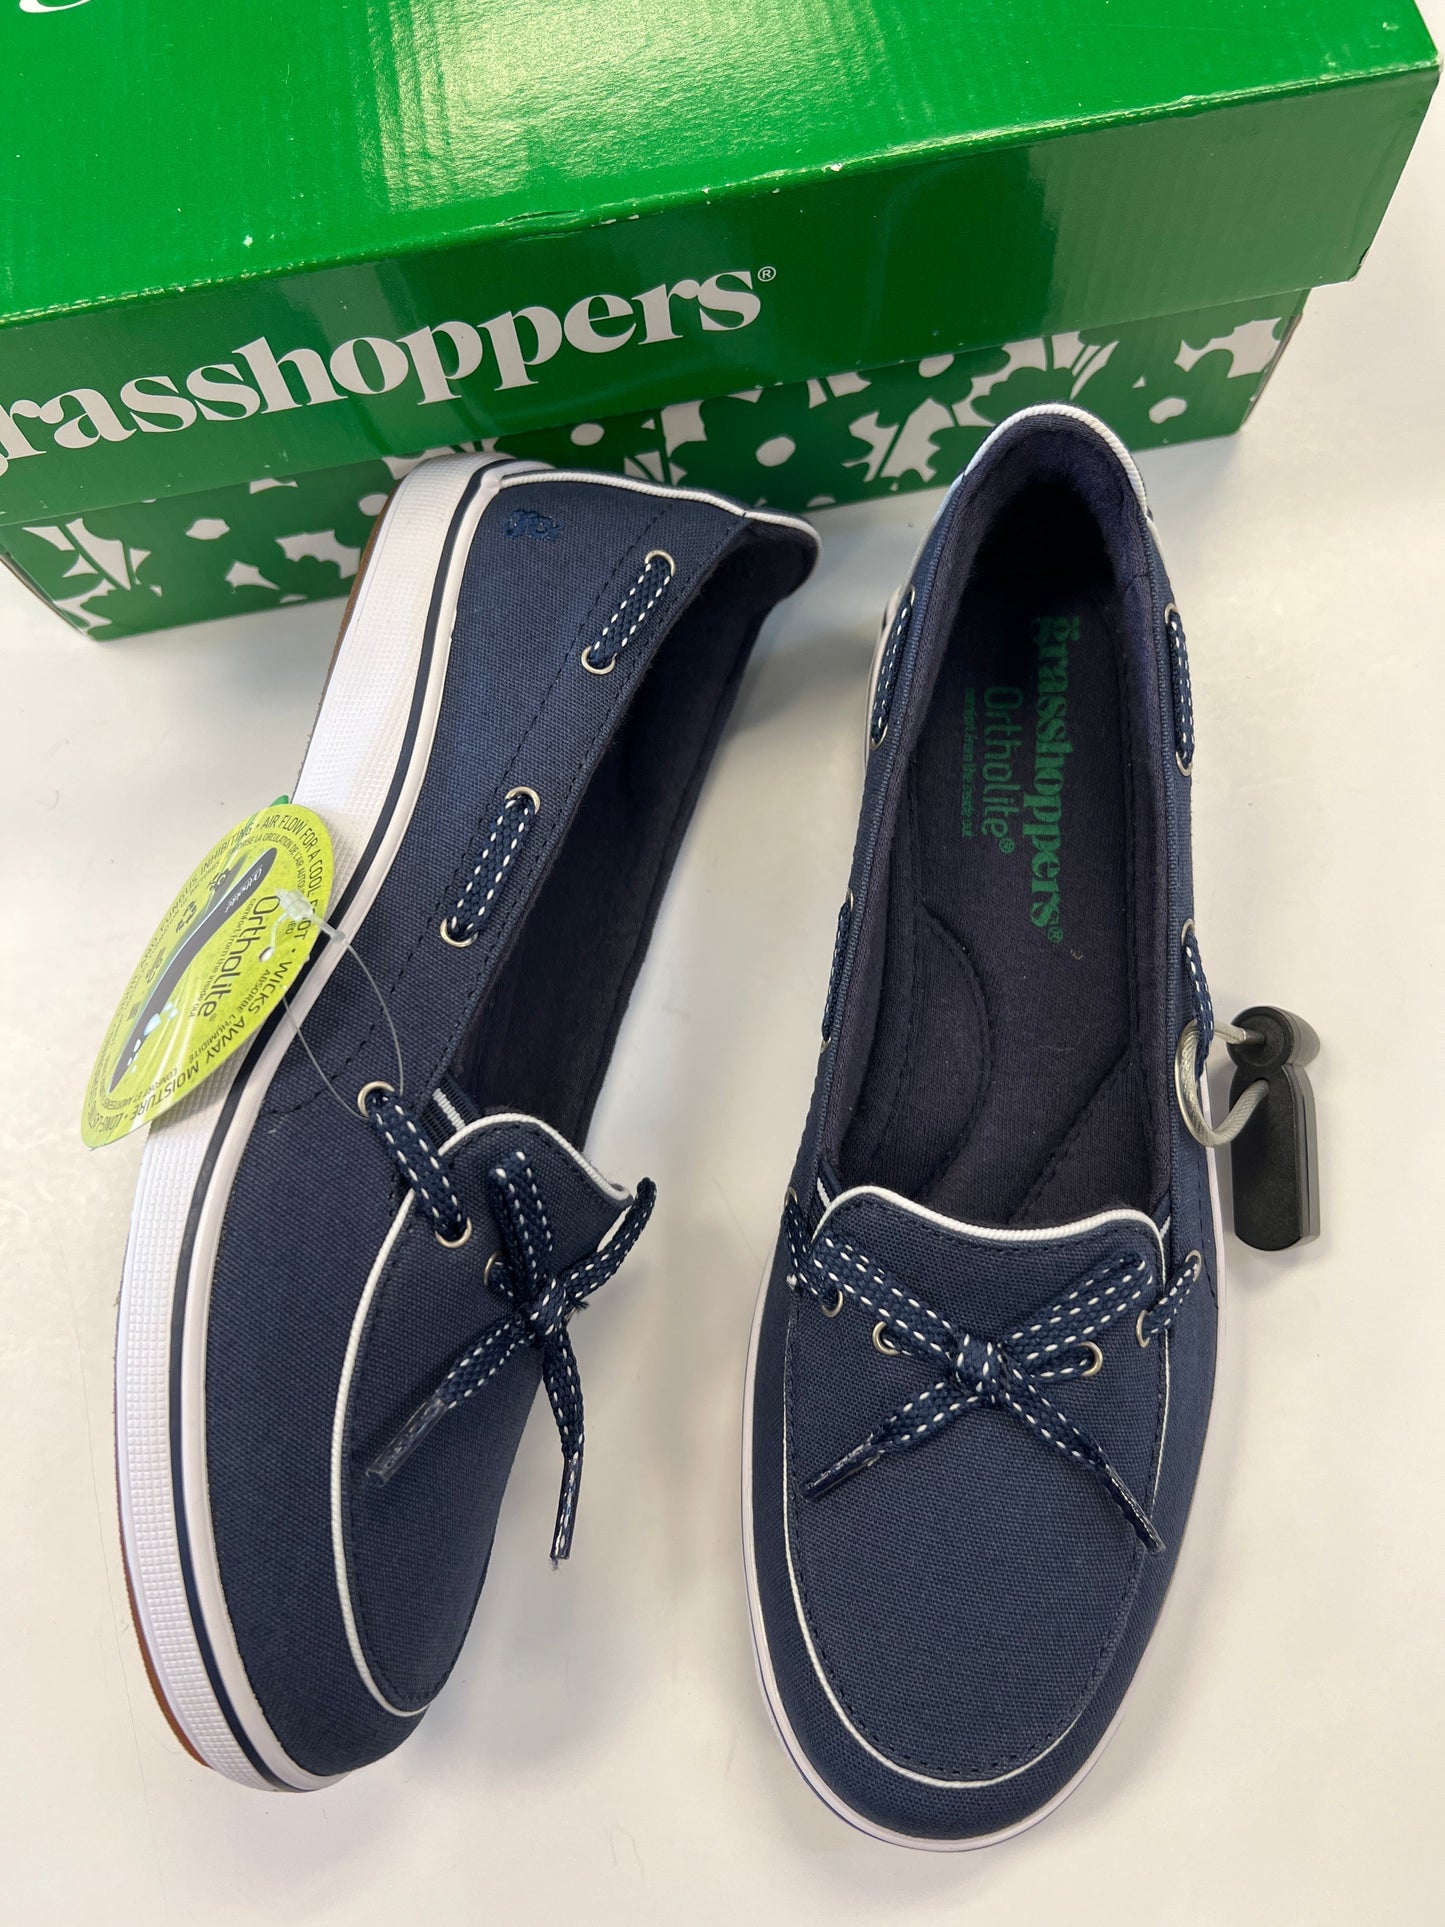 Shoes Sneakers By Grasshoppers  Size: 5